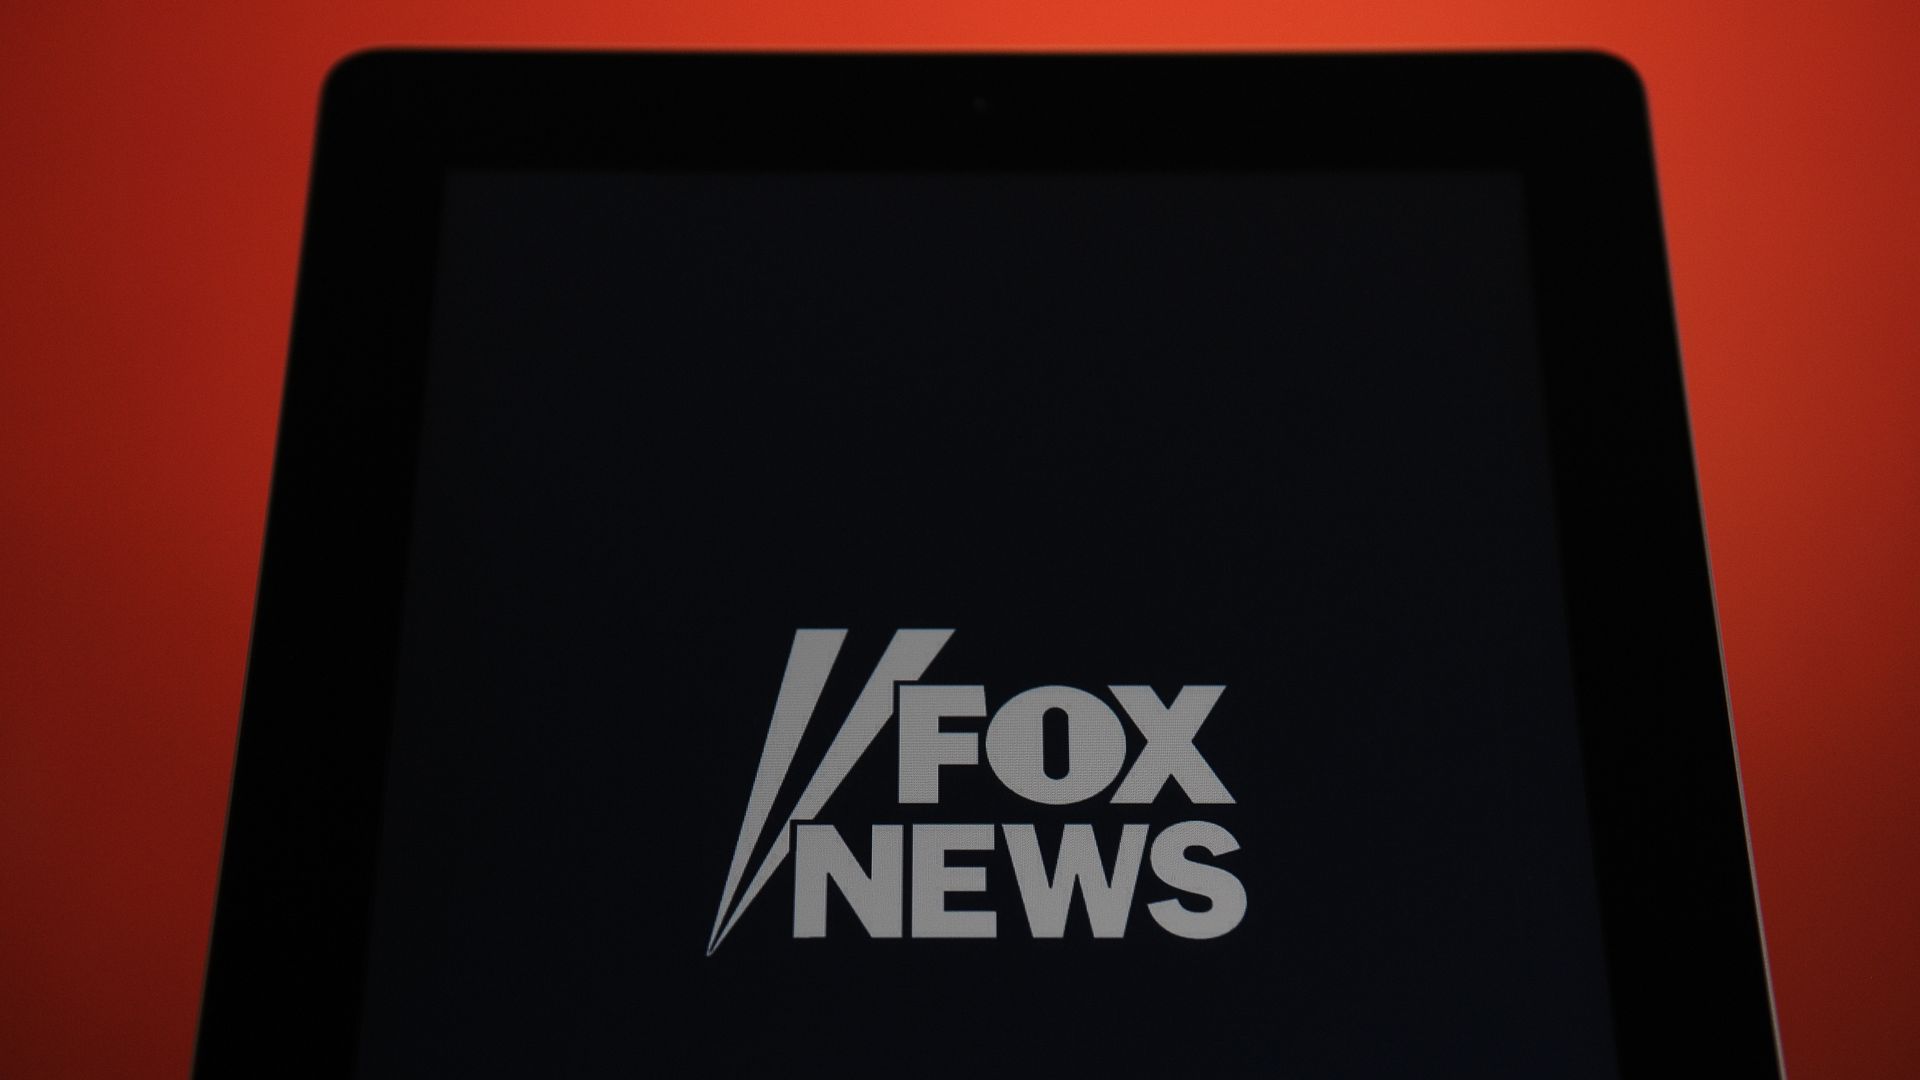 In this image, a large black screen displays the Fox News logo.